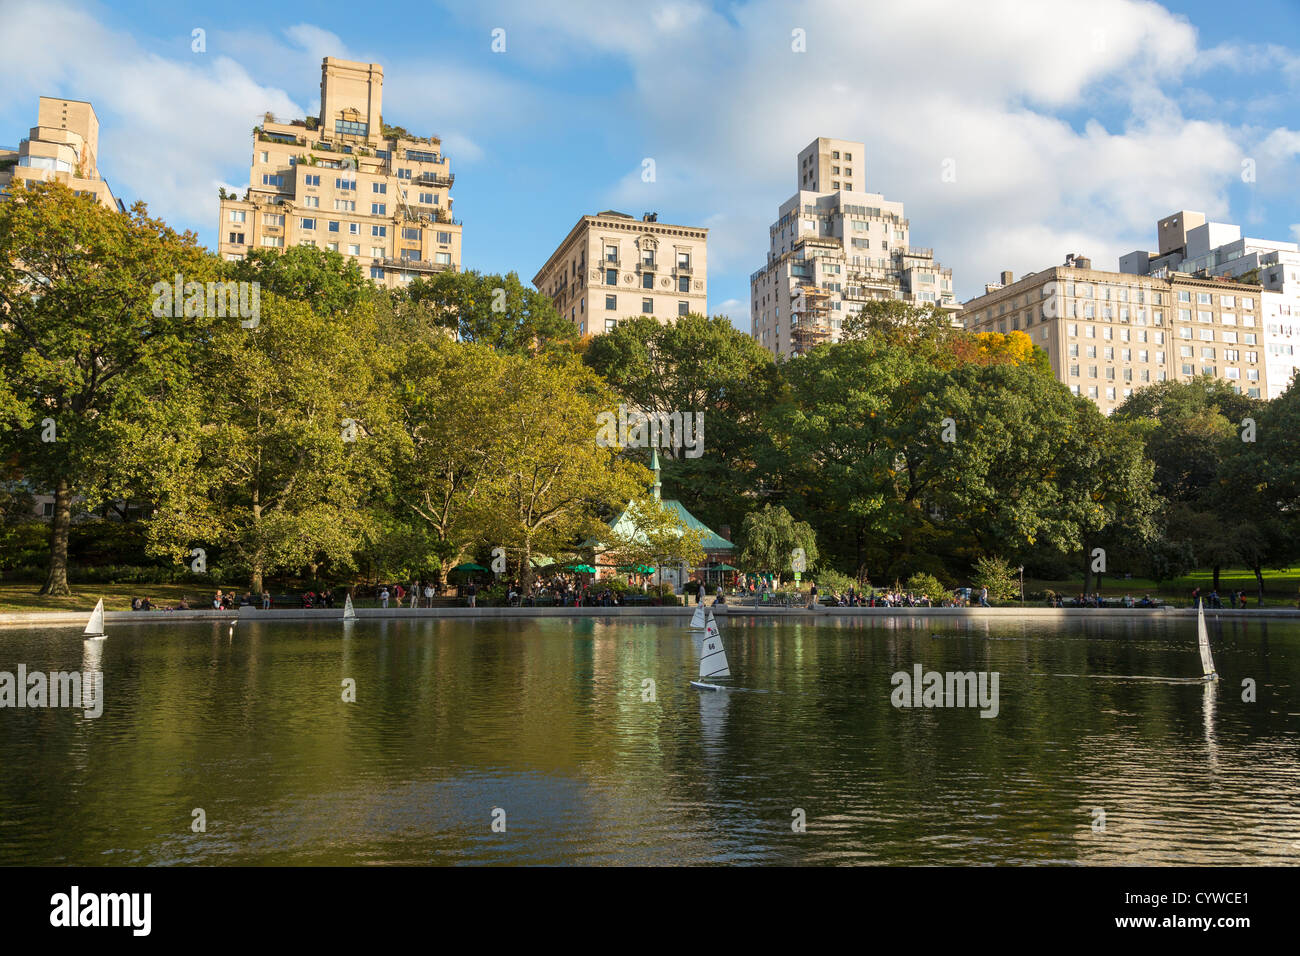 model sailing boats on Conservatory Water, near 72nd Street. Central Park, Manhattan, New York City, USA Stock Photo